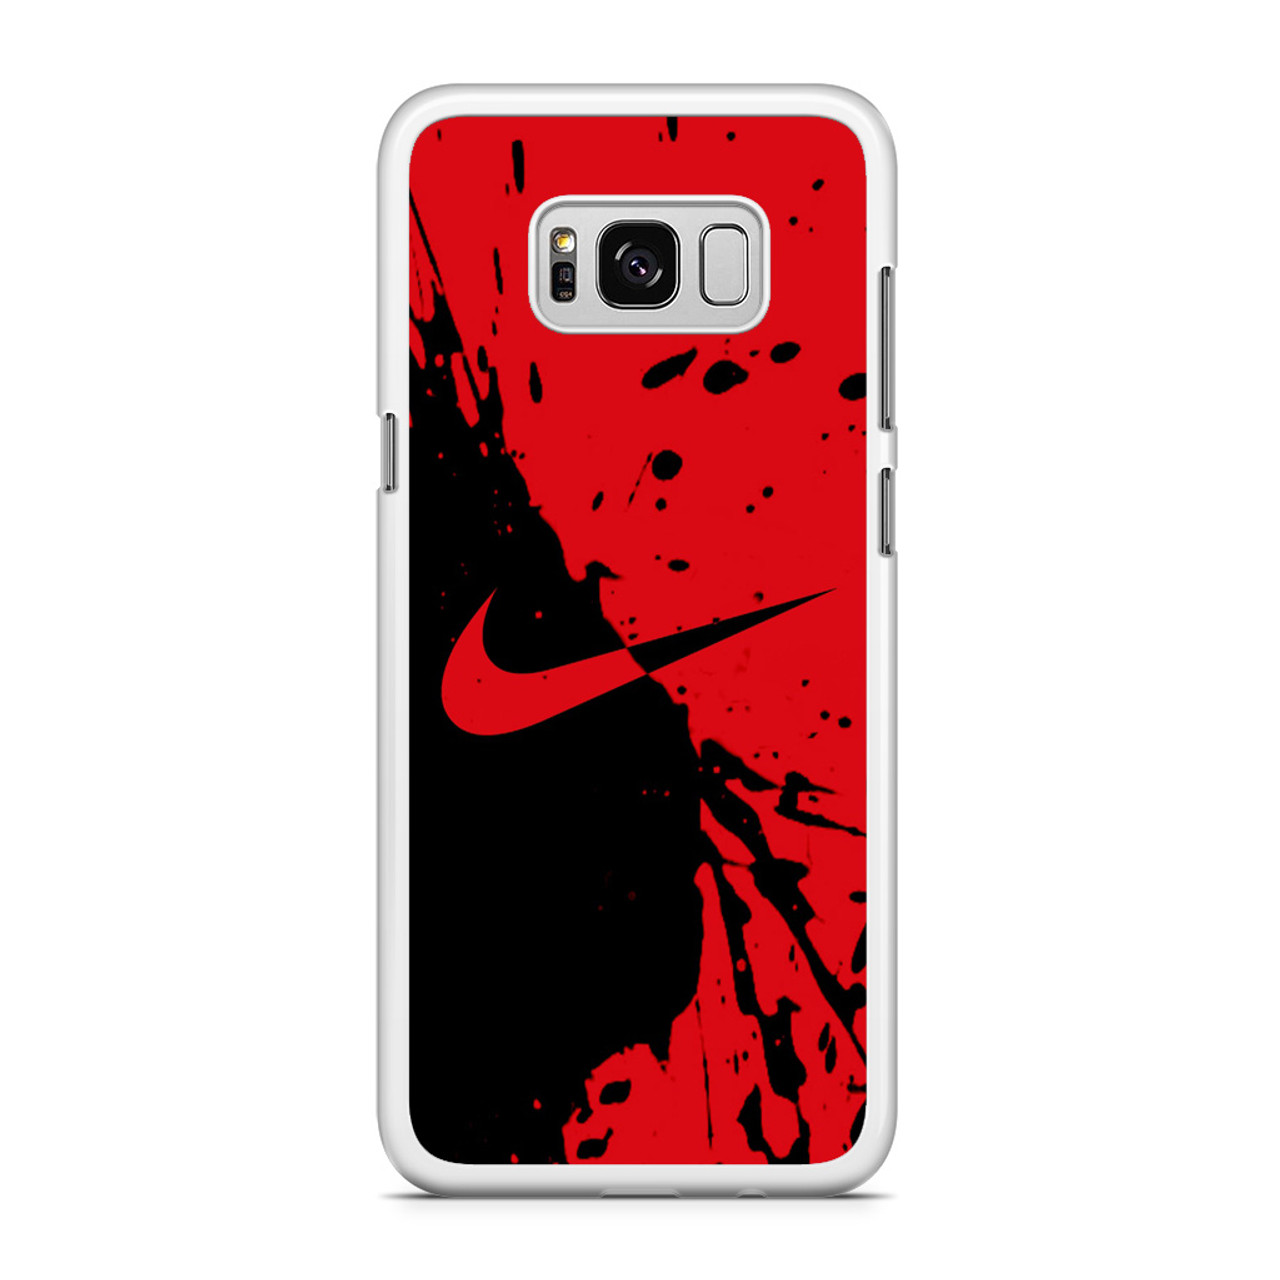 Red and Black Samsung S8 Case - CASESHUNTER